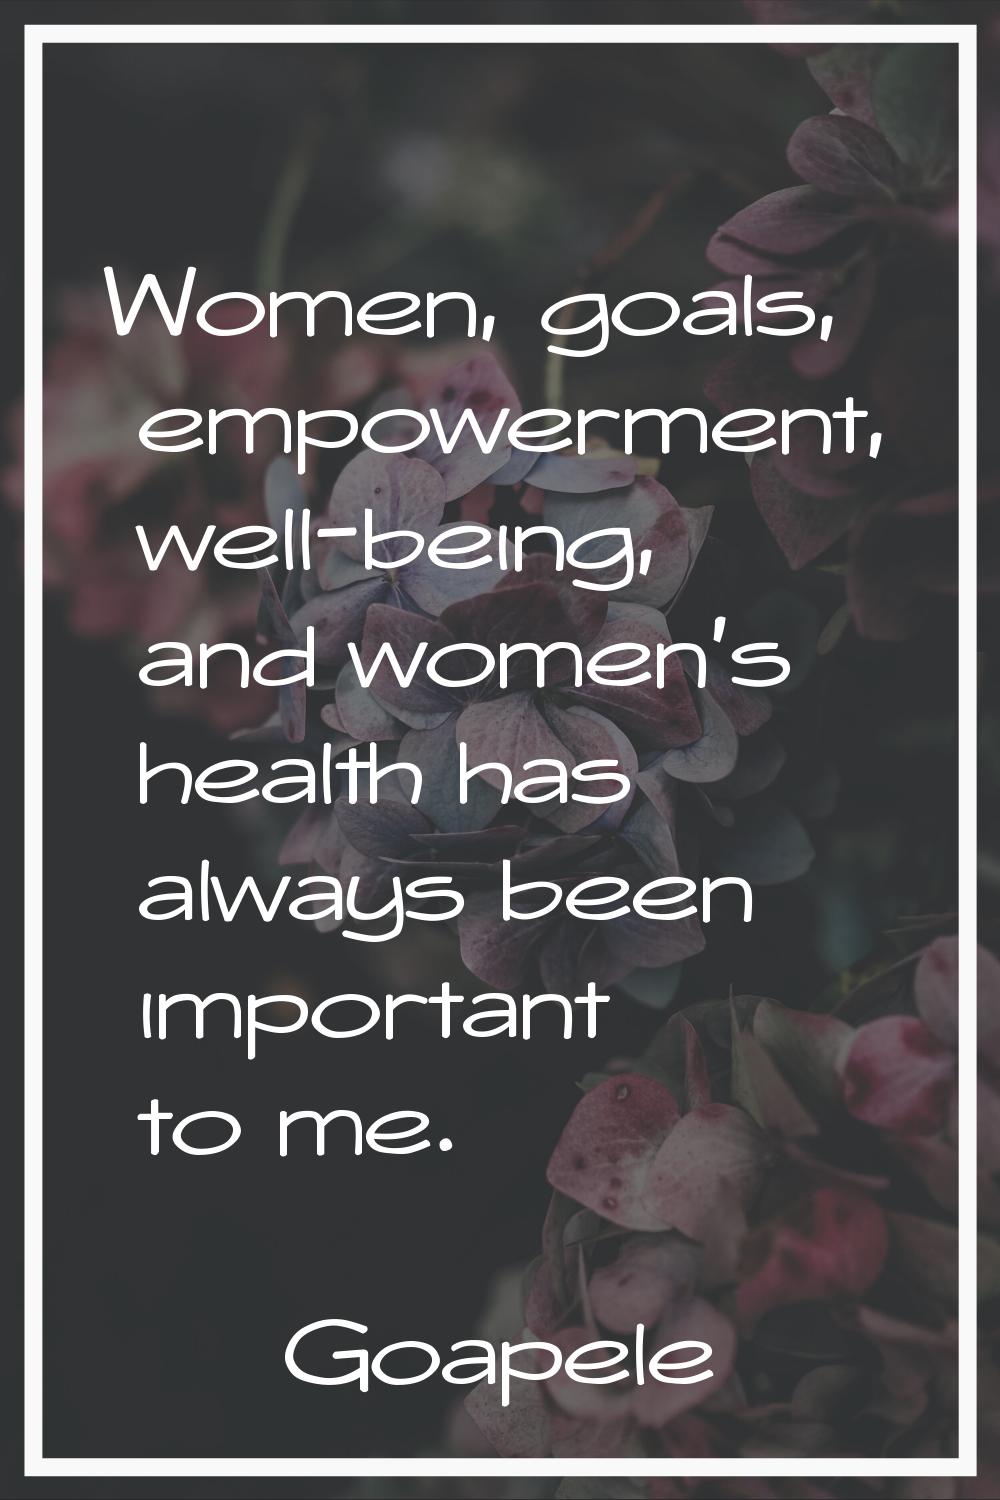 Women, goals, empowerment, well-being, and women's health has always been important to me.